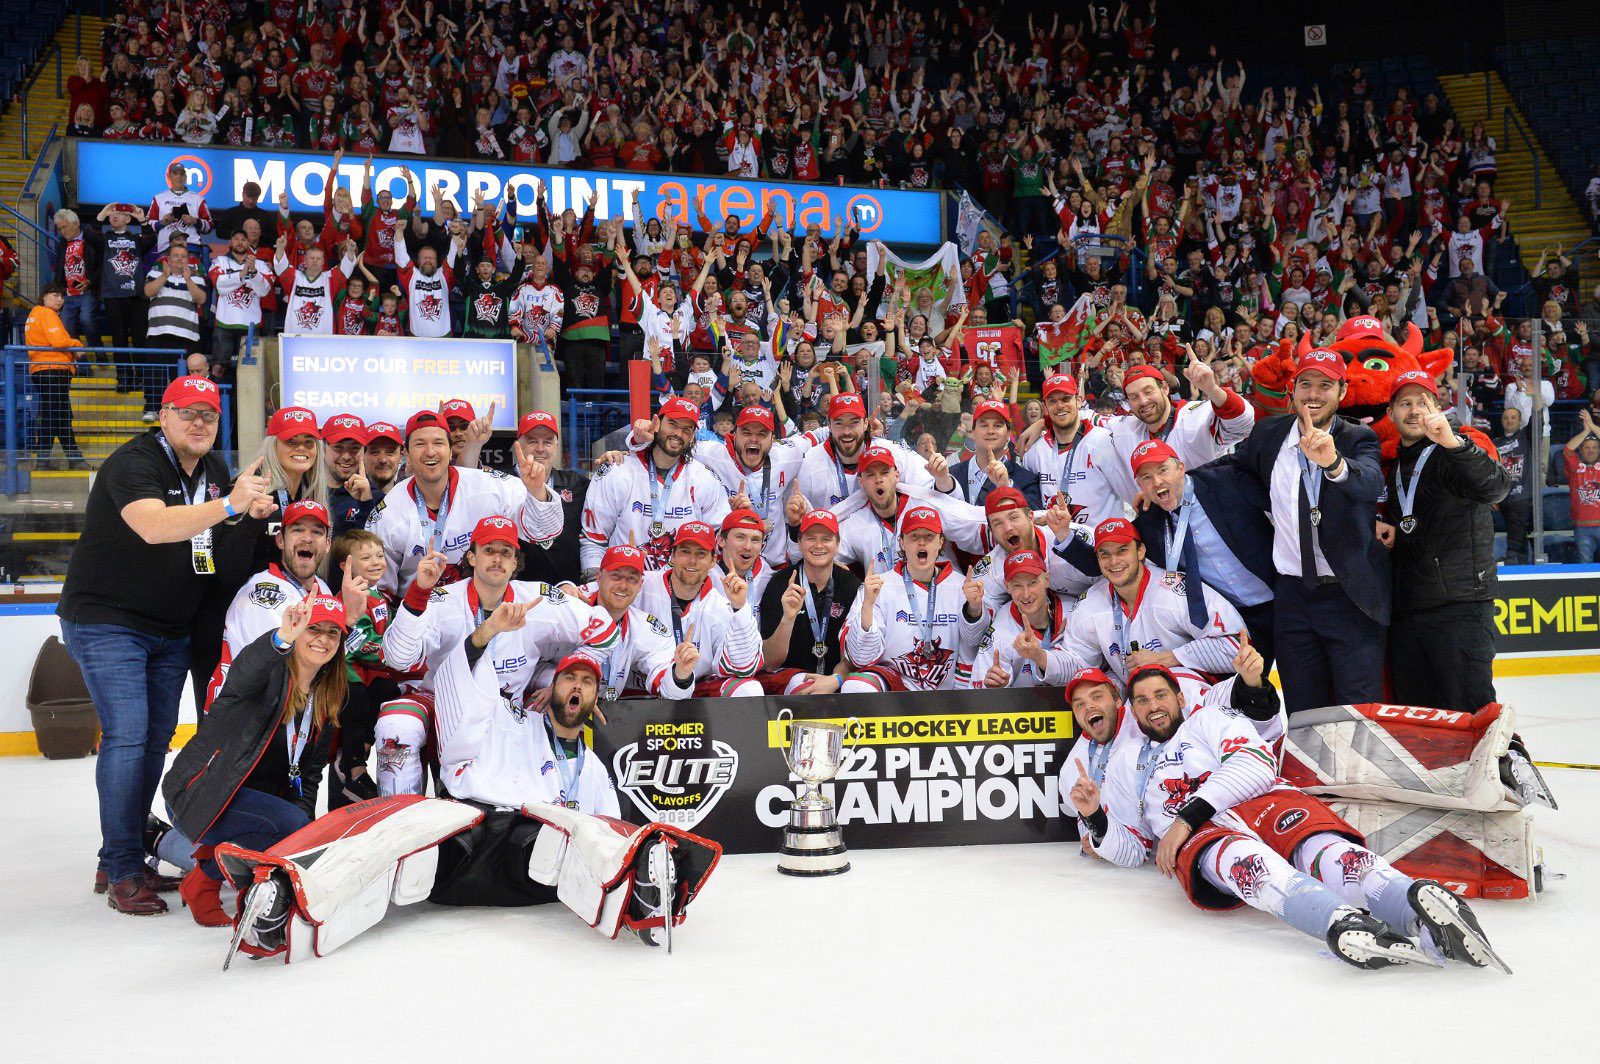 The Cardiff Devils upset the Belfast Giants to claim the 2021-22 Elite League Playoff title (Image: Dean Woolley)